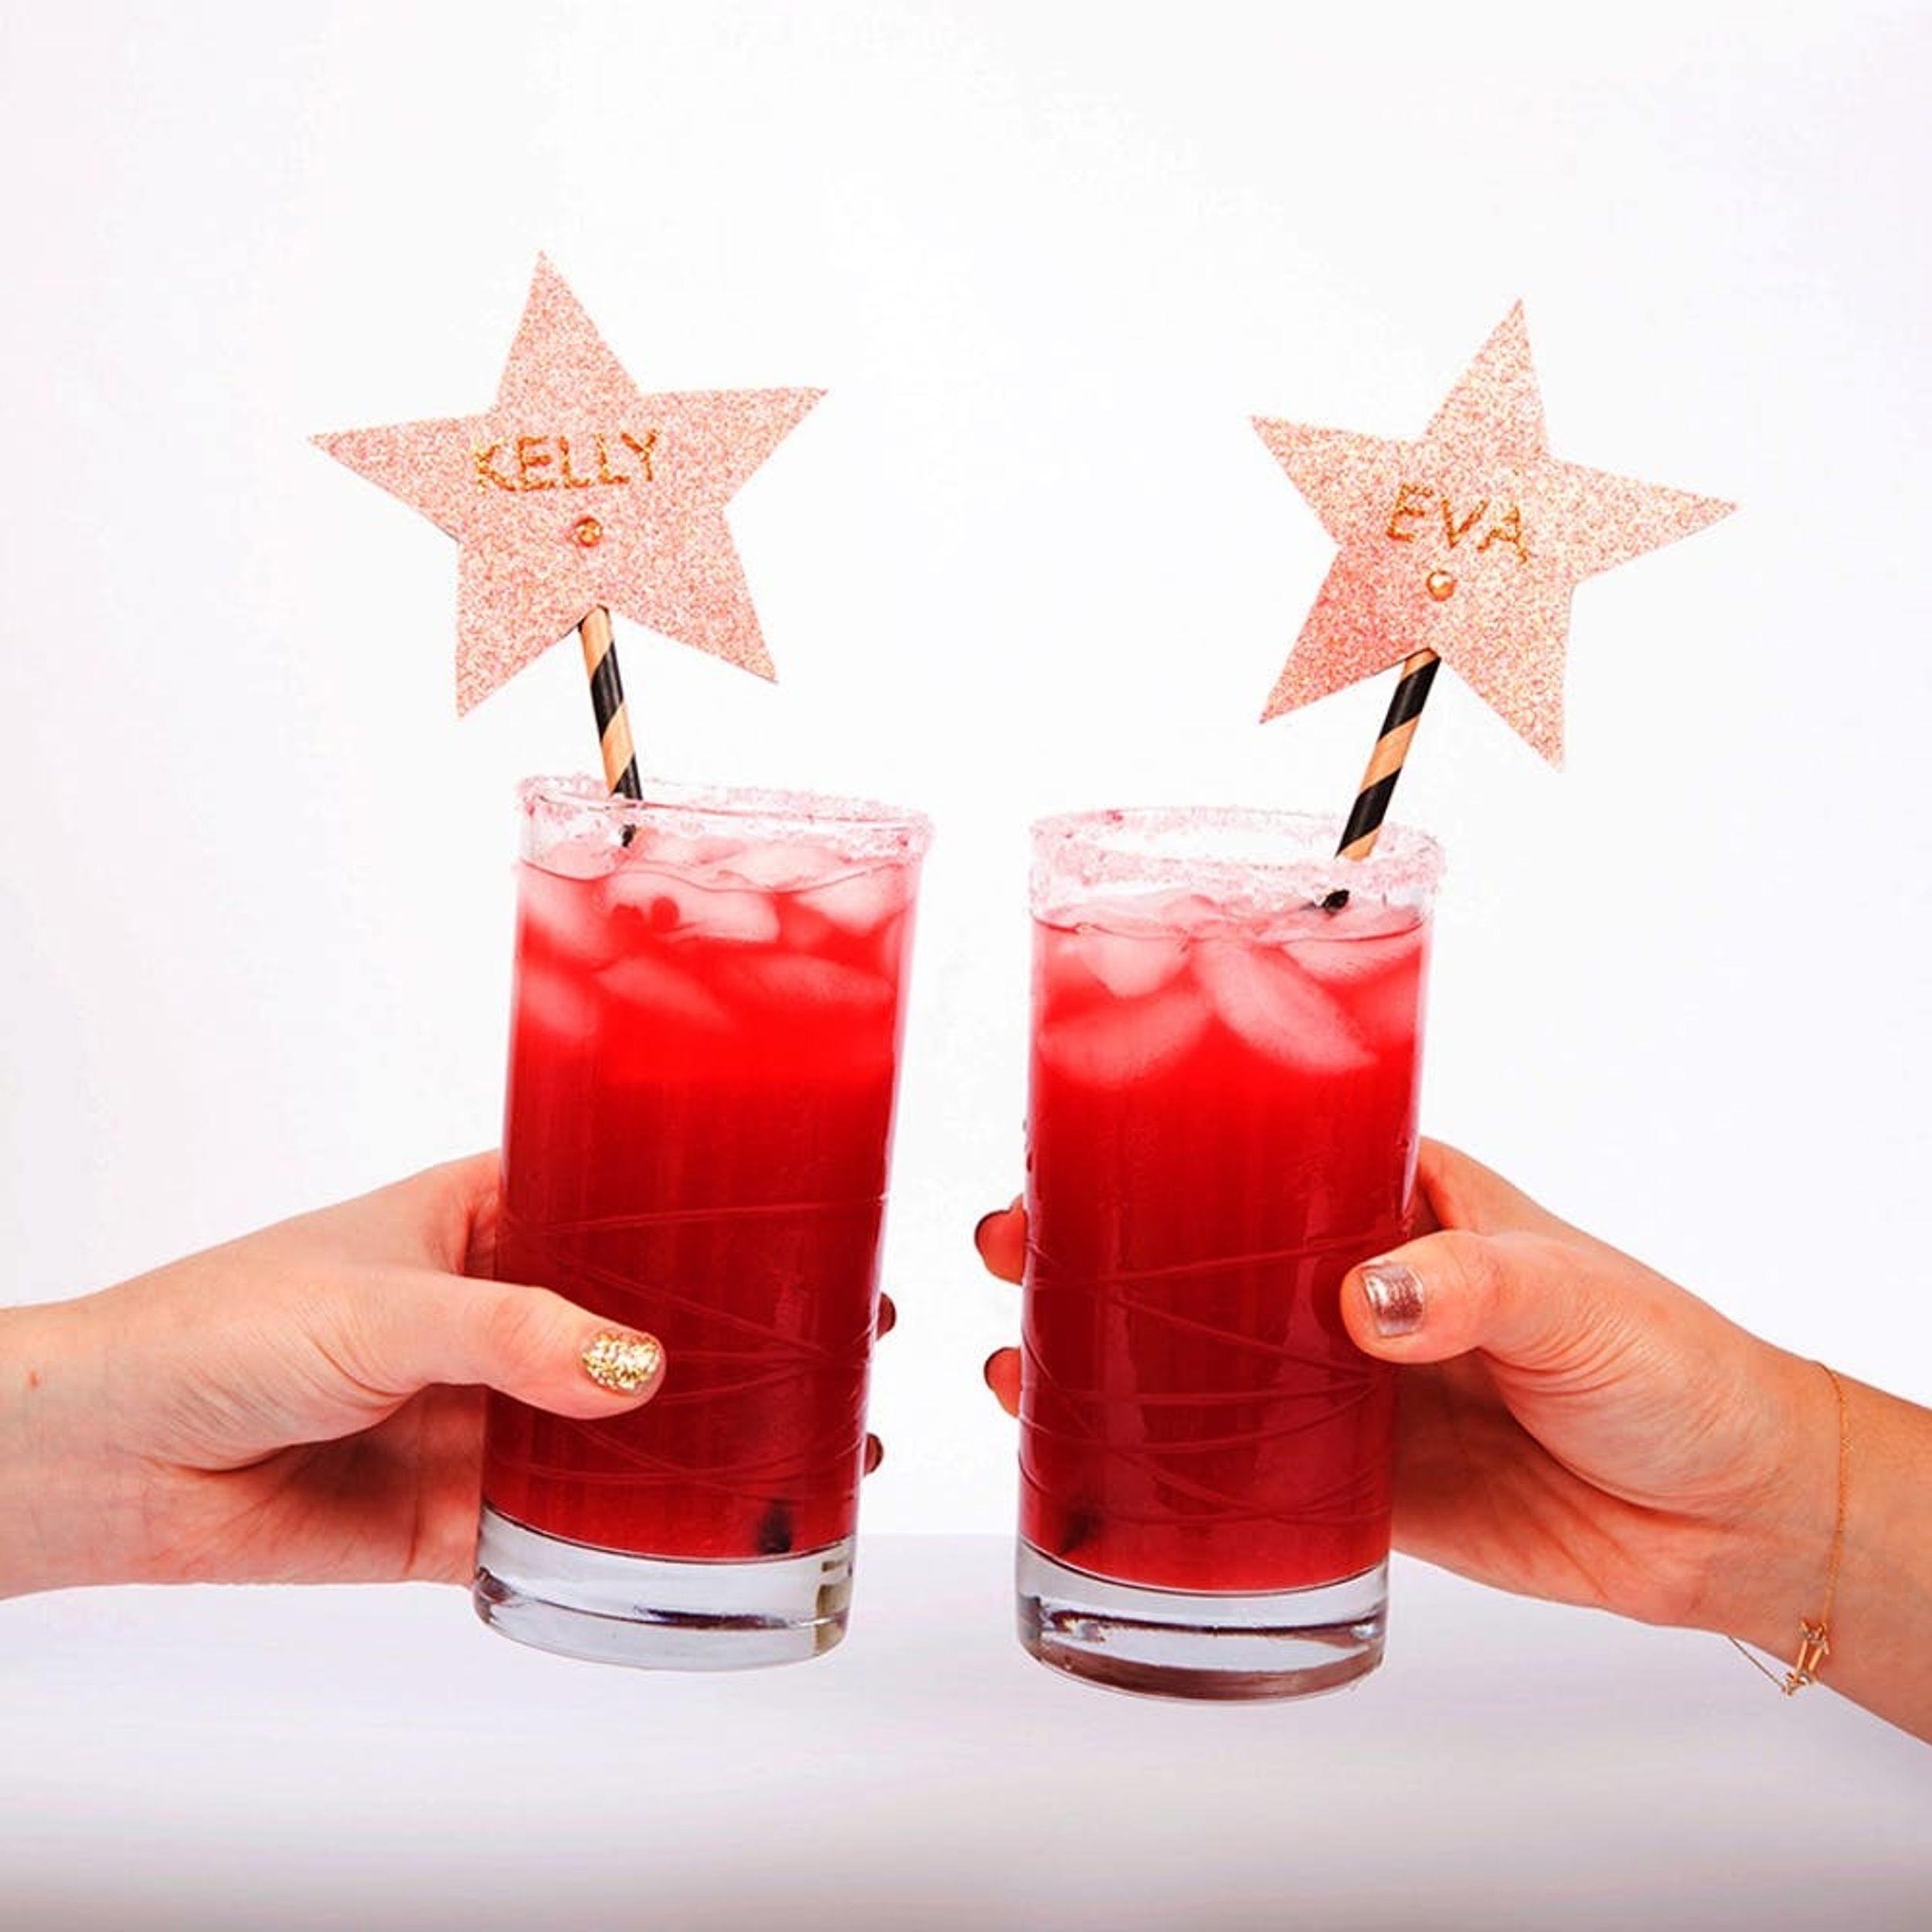 Make This Star-Studded Cocktail for Your Oscars Party